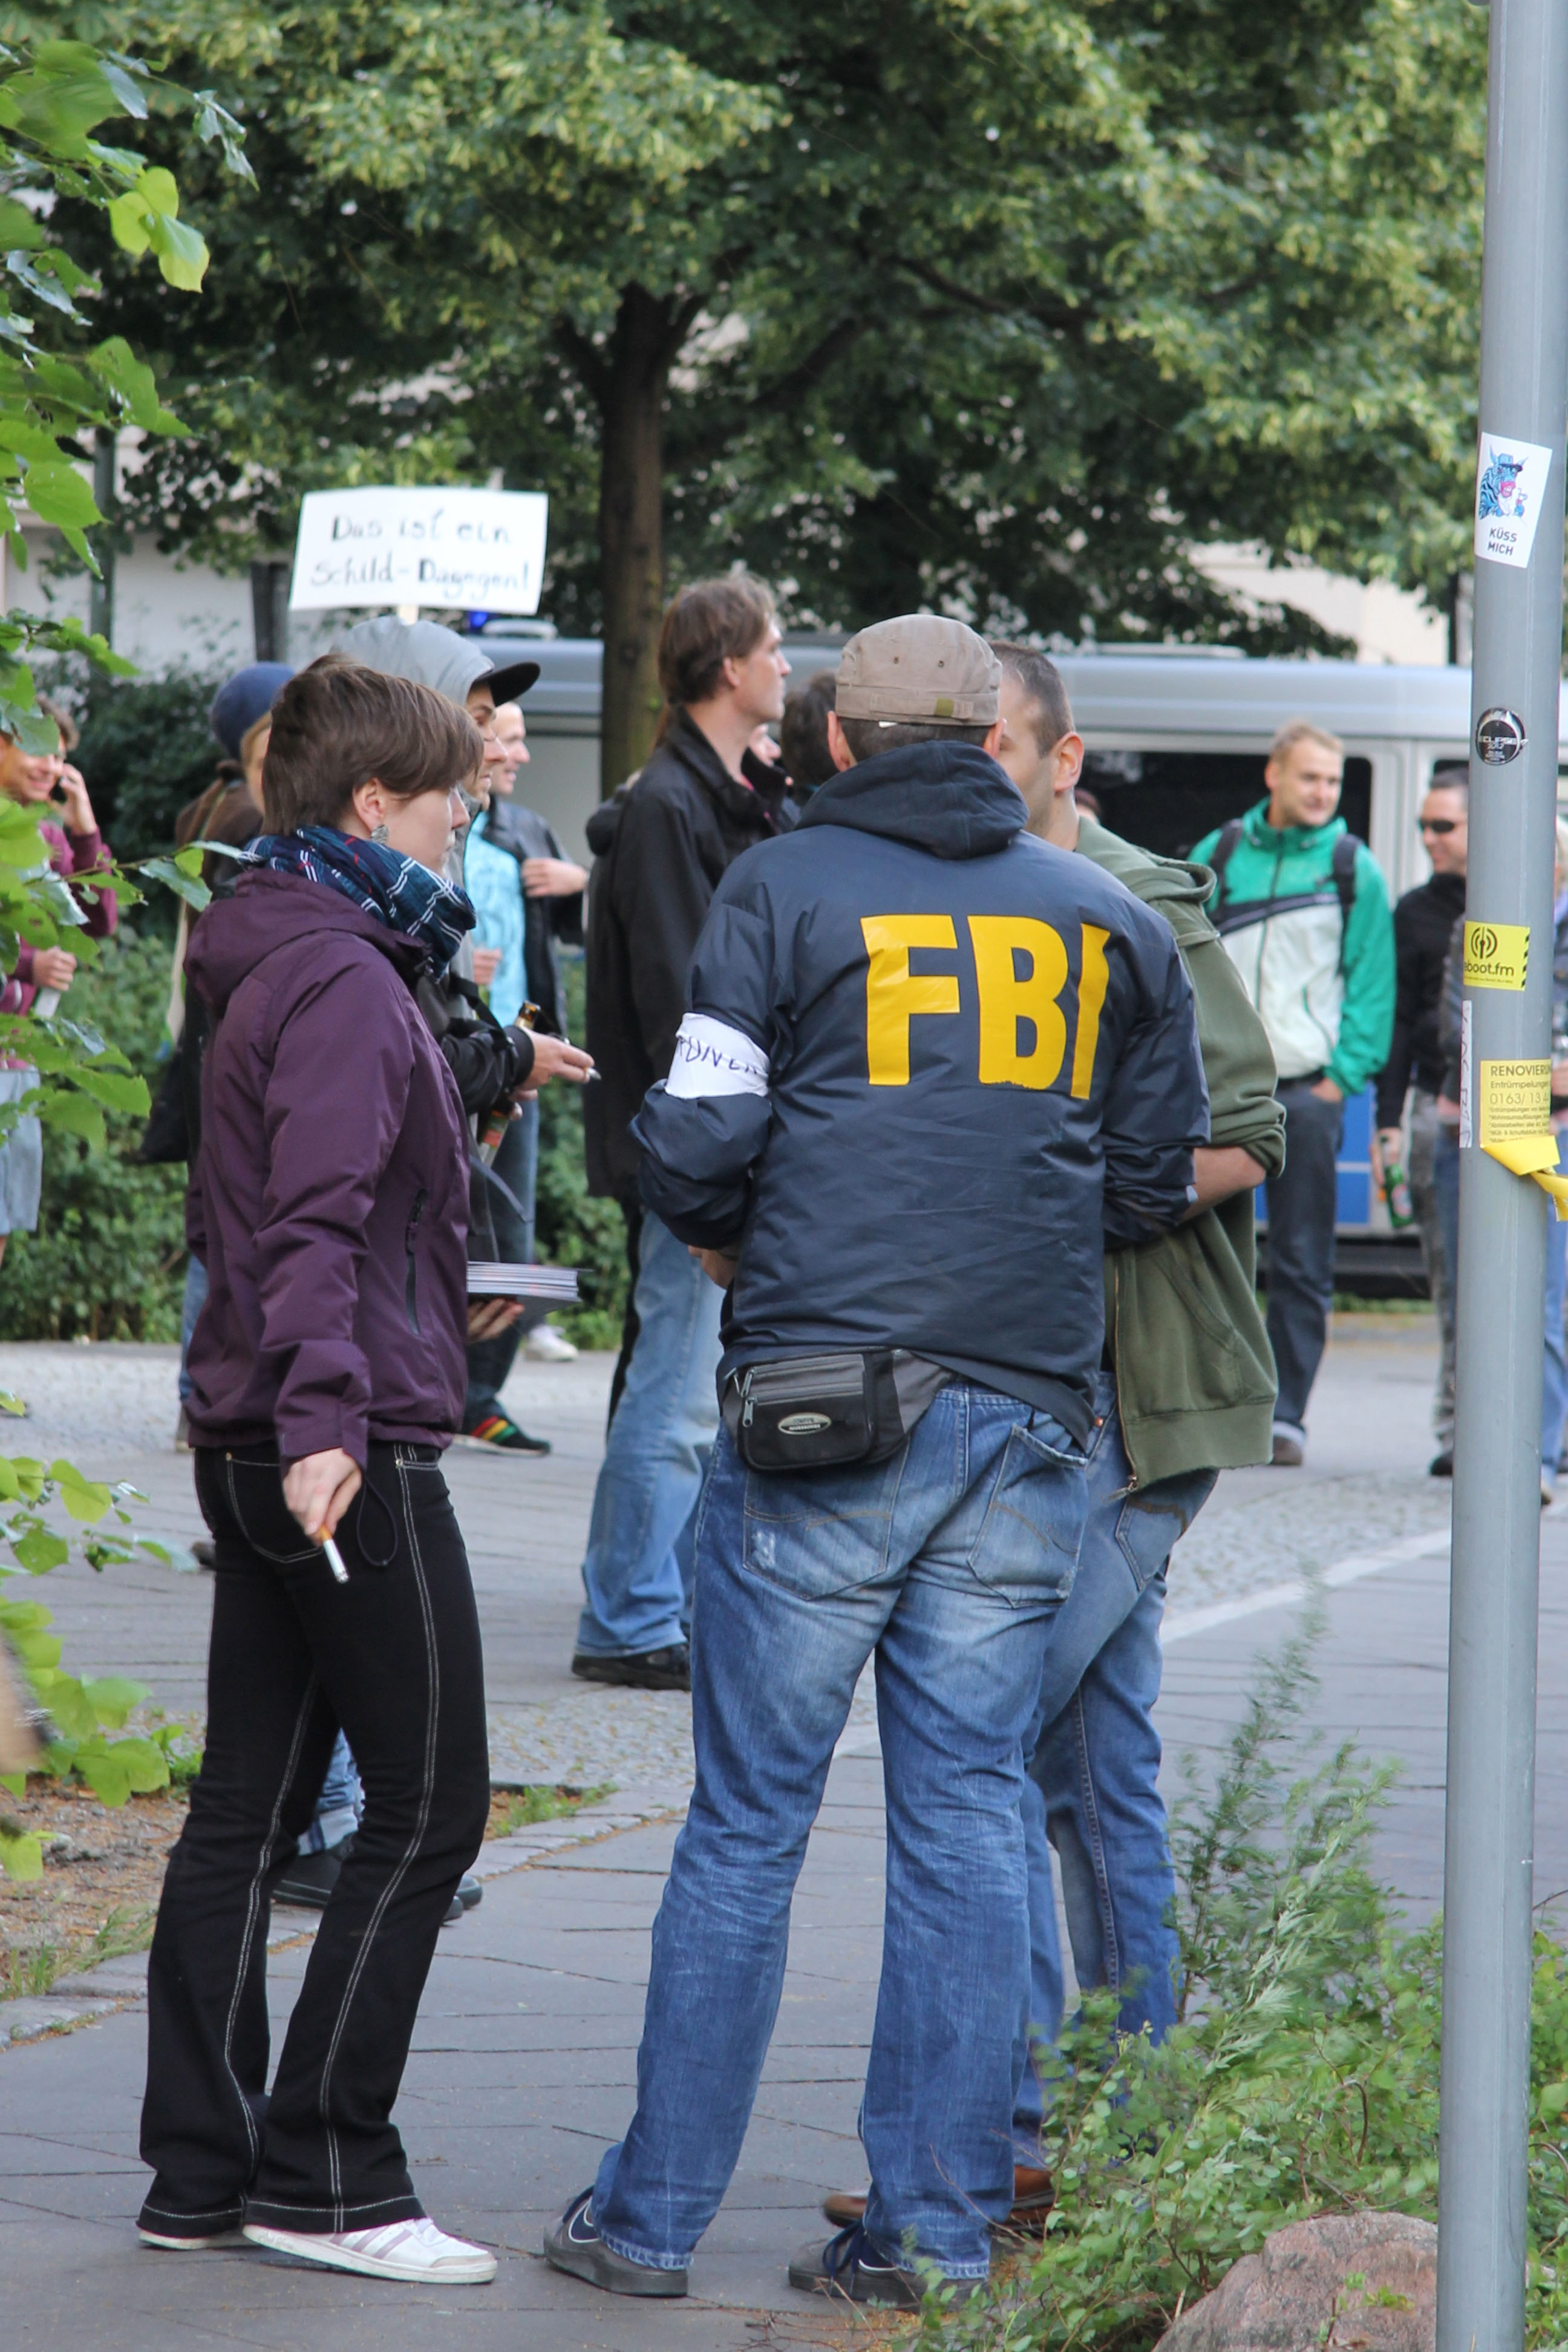 A steward in an FBI jacket at the GEMA protest at the Kulturbrauerei in Berlin